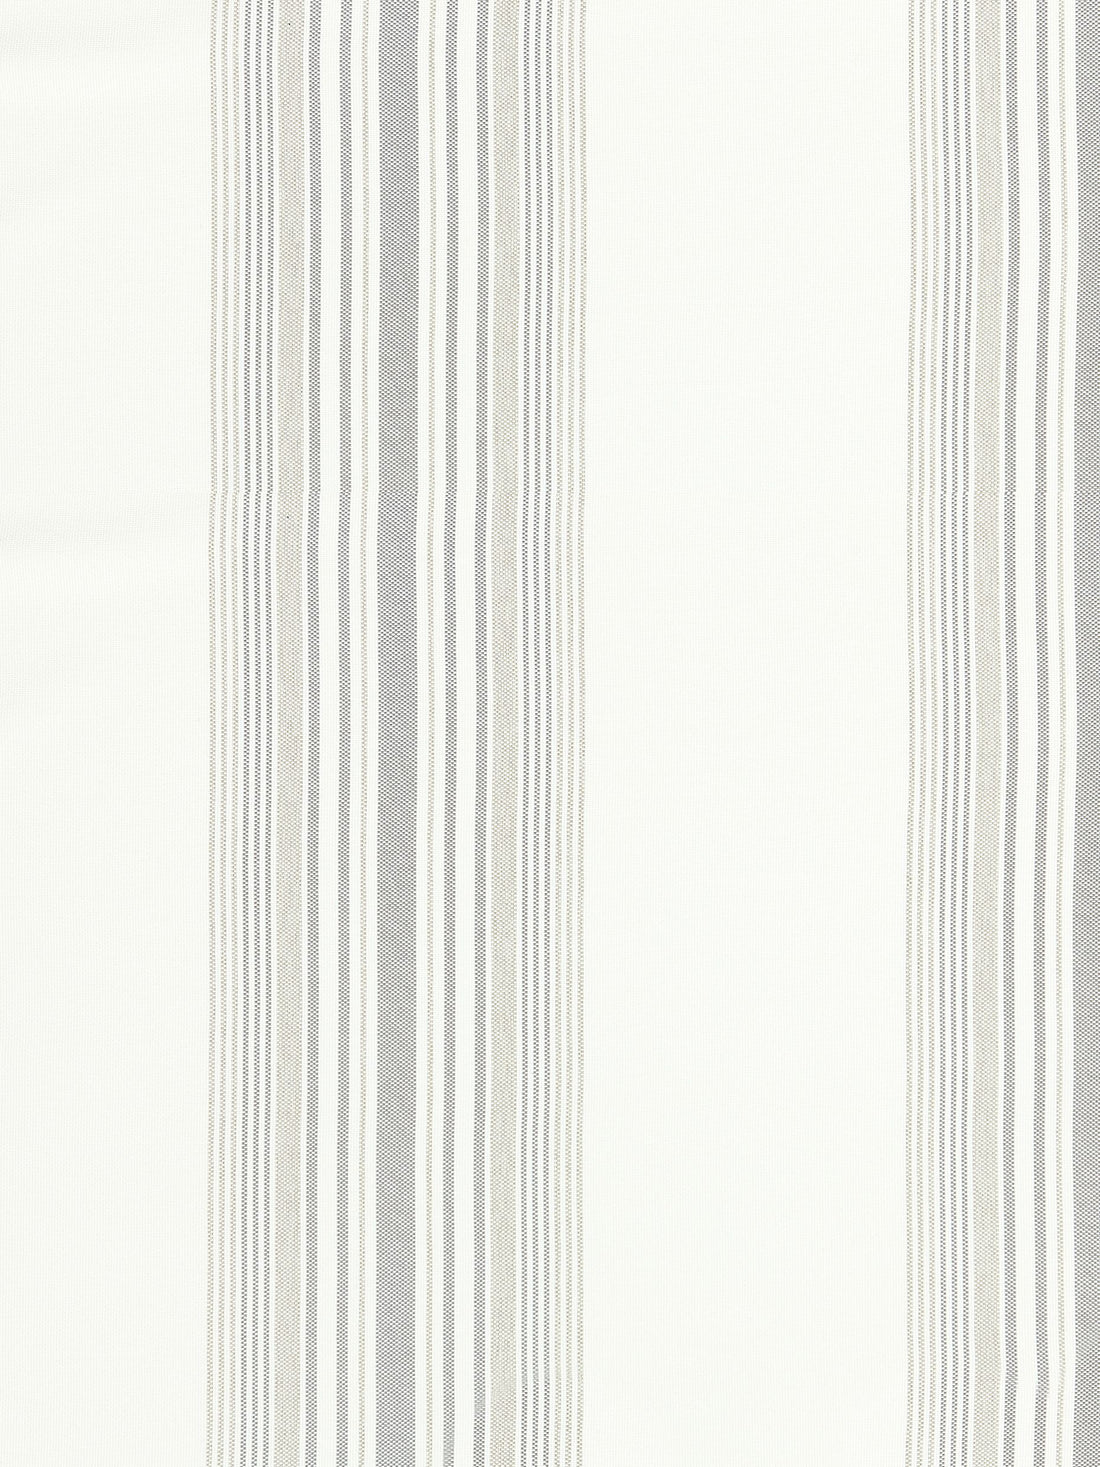 Nautical Stripe fabric in white sand color - pattern number SC 000127069 - by Scalamandre in the Scalamandre Fabrics Book 1 collection